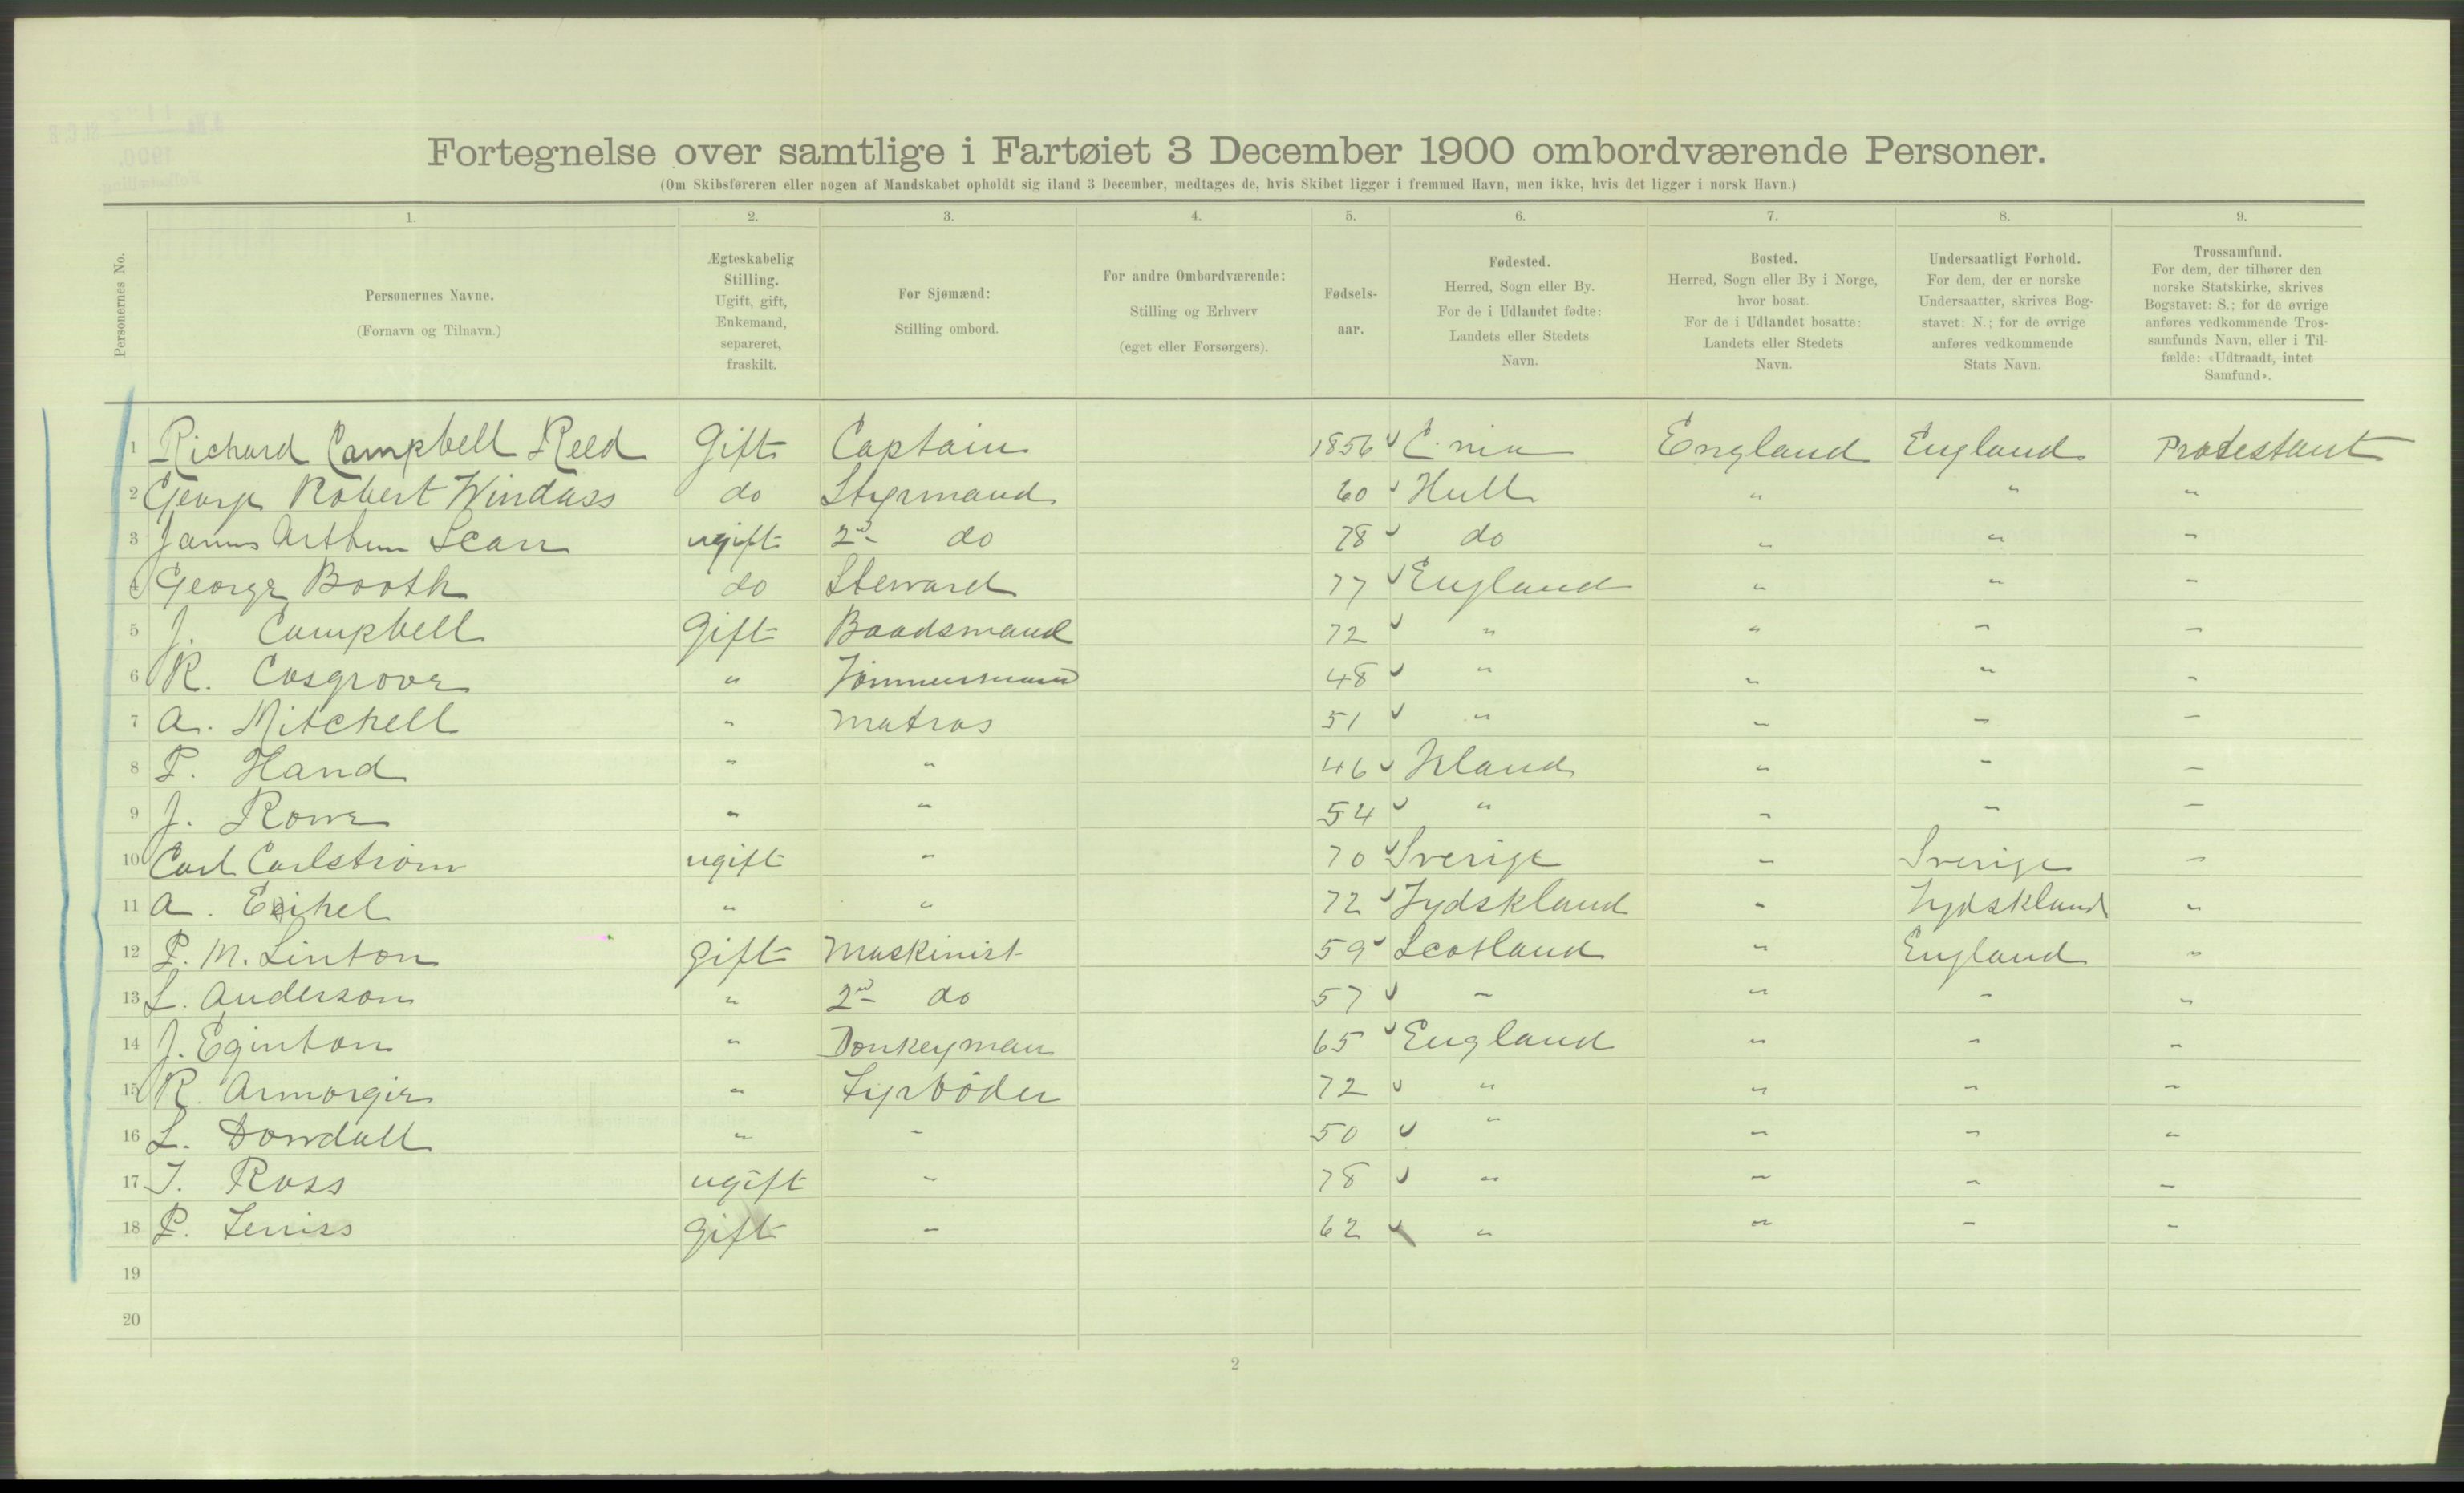 RA, 1900 Census - ship lists from ships in Norwegian harbours, harbours abroad and at sea, 1900, p. 374